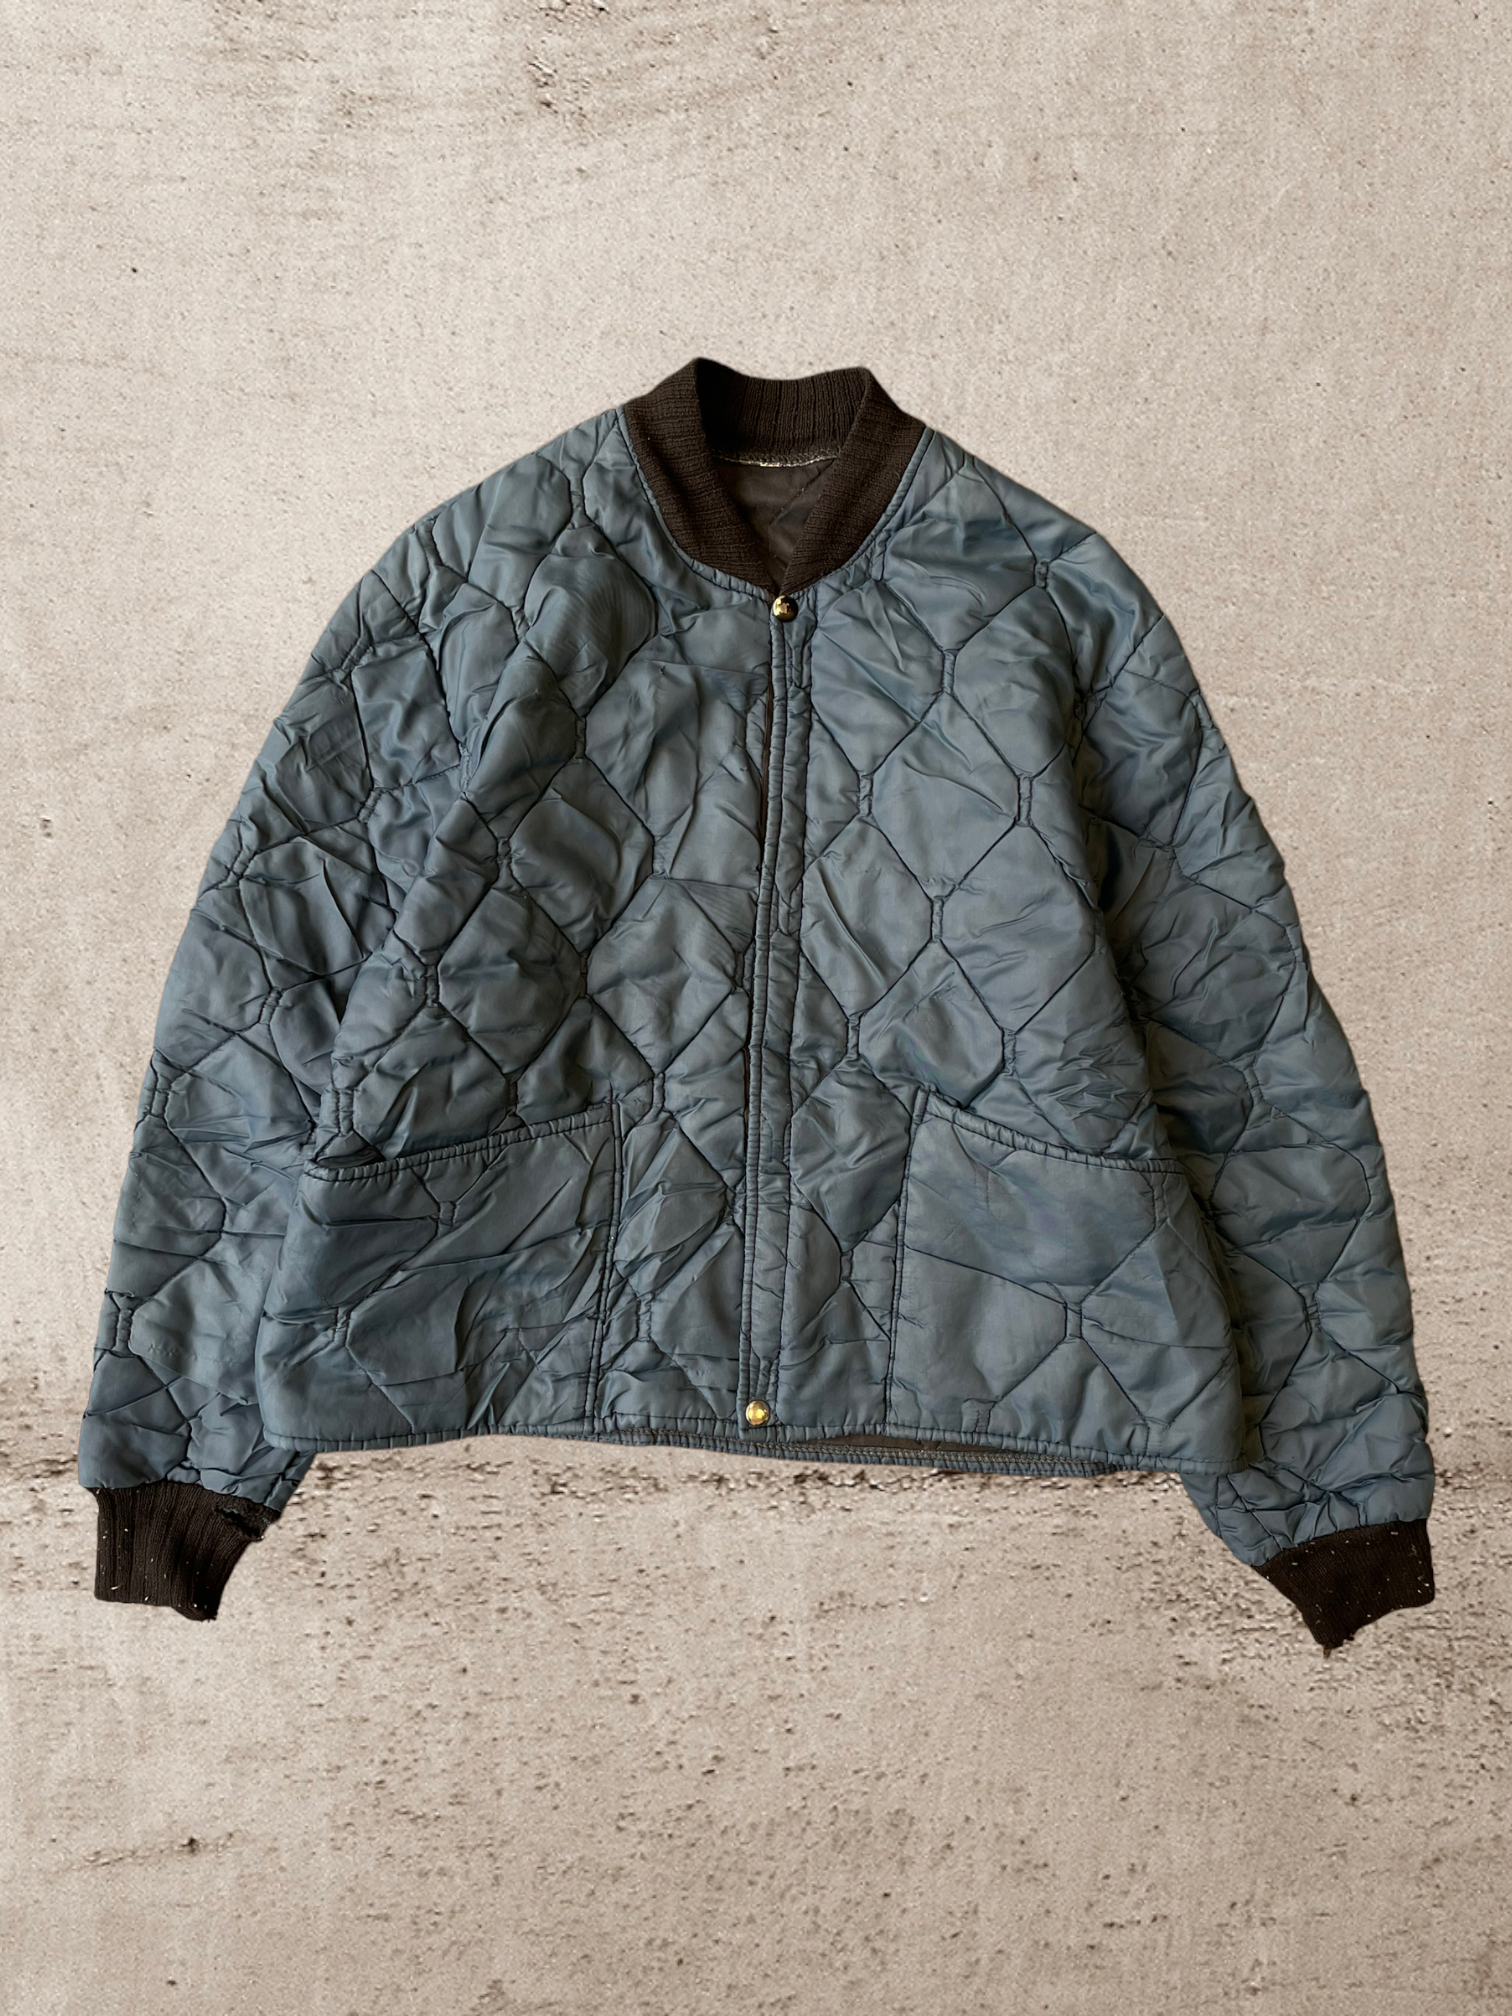 90s Quilted Bomber Jacket - Medium